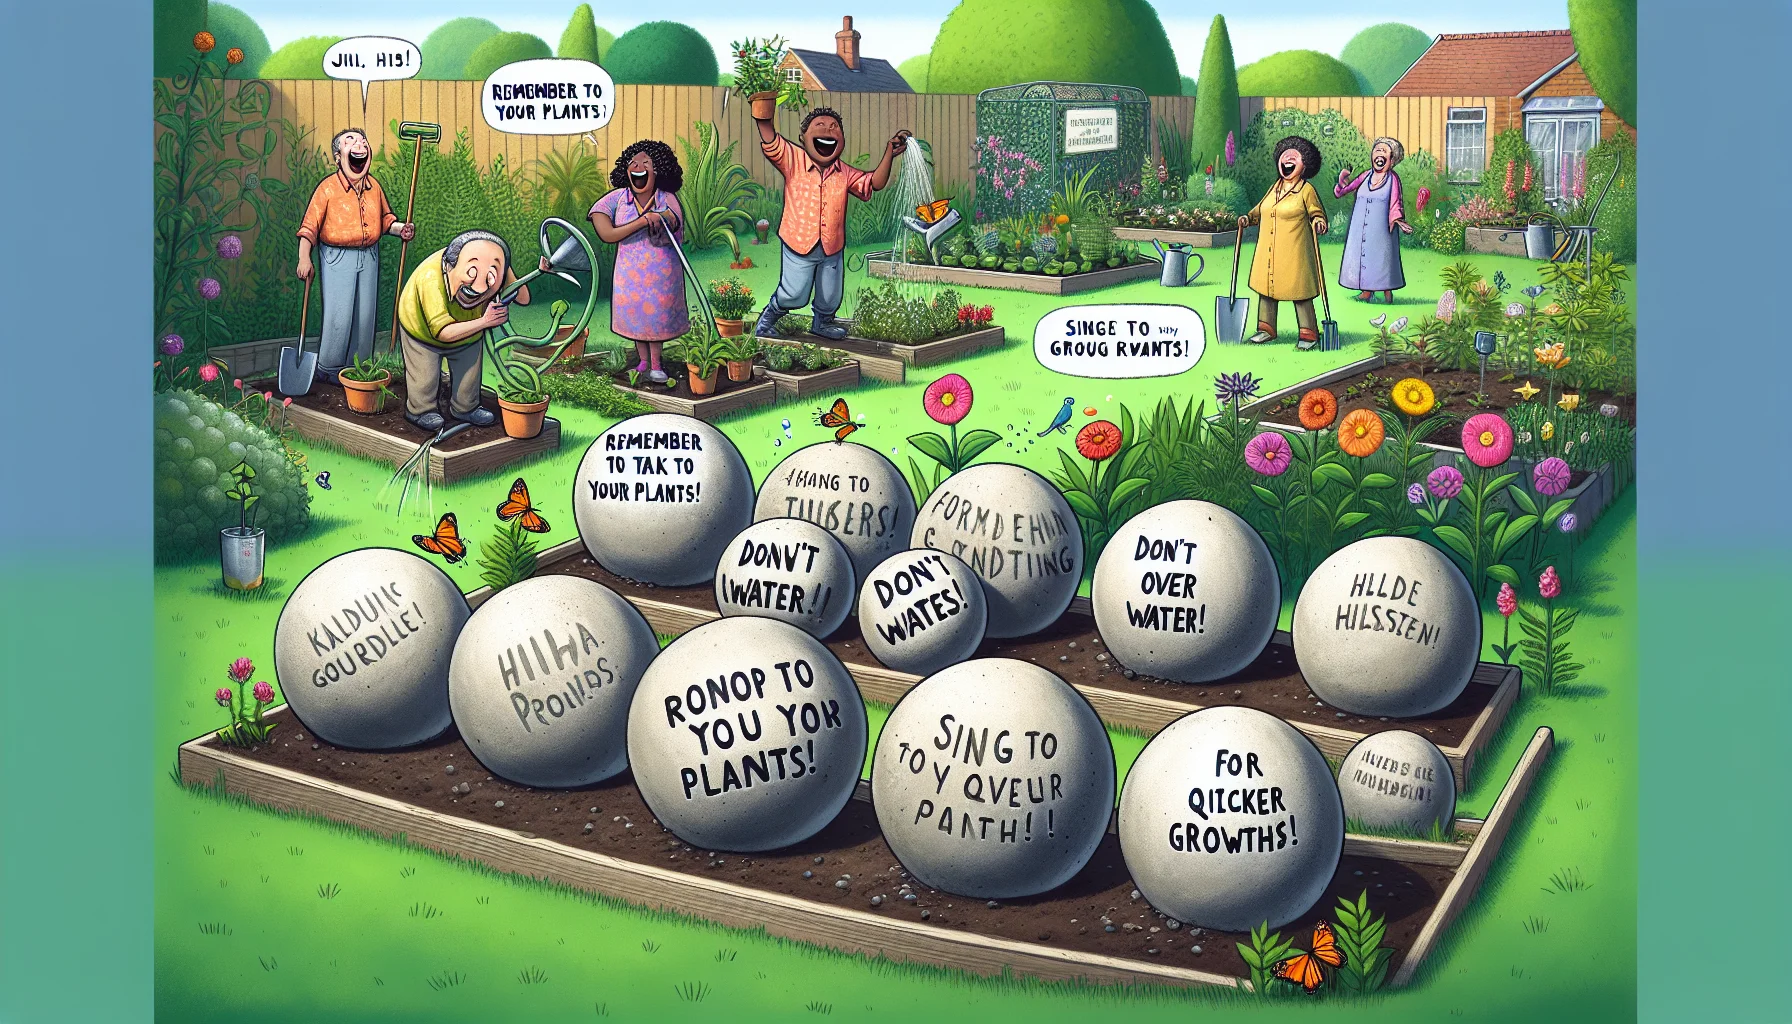 Illustrate an amusing scenario in a garden setting, aiming to attract people to the joys of gardening. In the forefront, show a series of concrete garden spheres. They should be various sizes and display quirky 'how-to' advice written on them. For instance, one could say 'Remember to talk to your plants!', another might instruct 'Don't overwater!', and another could advise 'Sing to your plants for quicker growth!'. The background should be a well-tended garden with lush vegetation, blooming flowers, and a diverse representation of people laughing and enjoying gardening activities - a Caucasian man watering a flowerbed, a Black woman planting a sapling, a Middle-Eastern child chasing butterflies, and a Hispanic lady trimming a hedge.